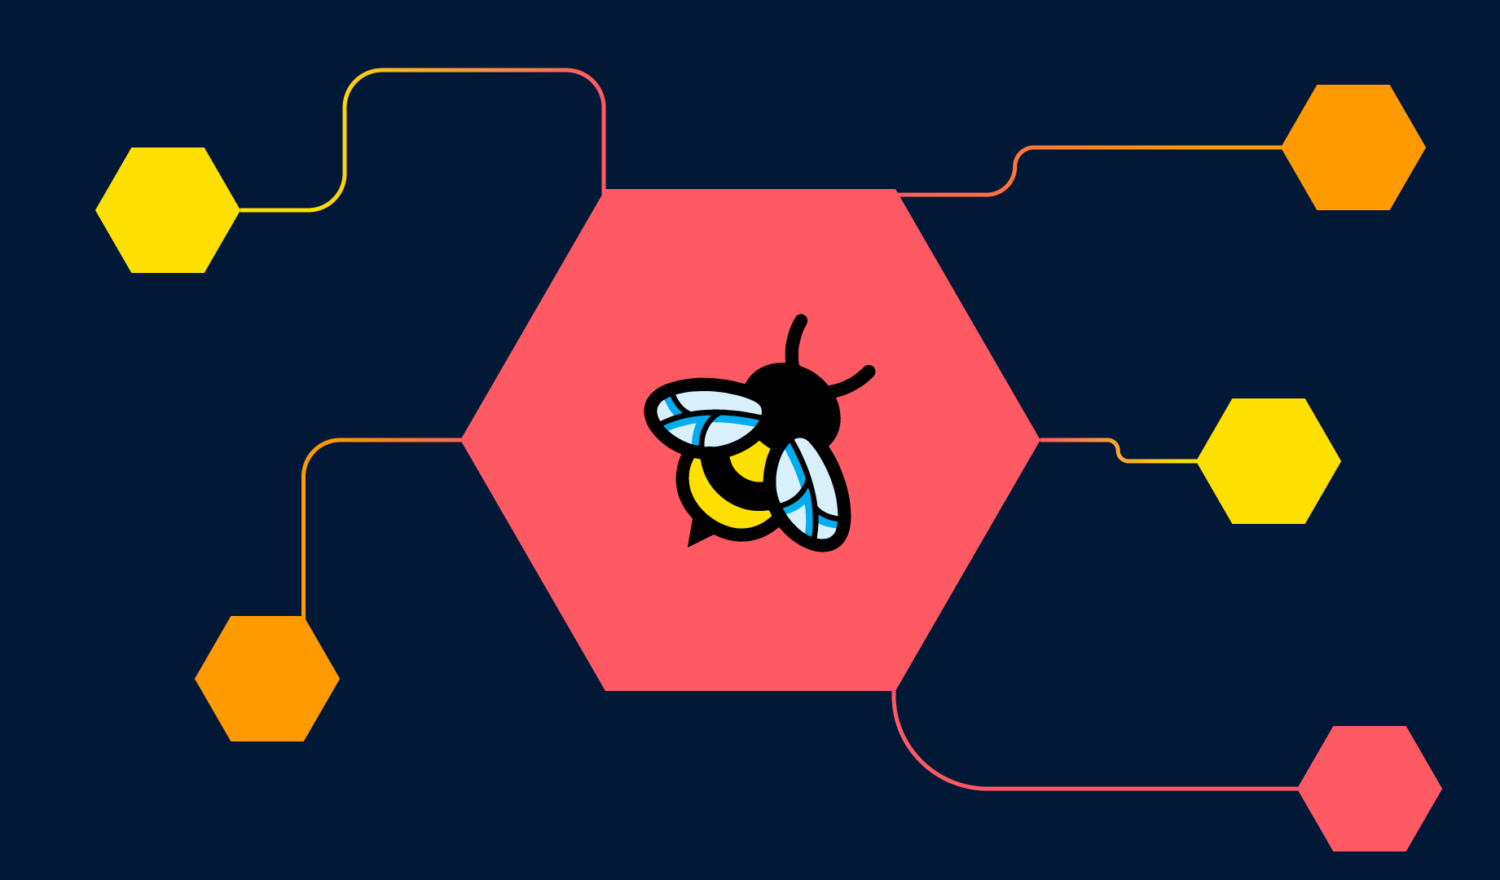 The eBPF bee in a honeycomb illustration connected to other honeycombs like a network